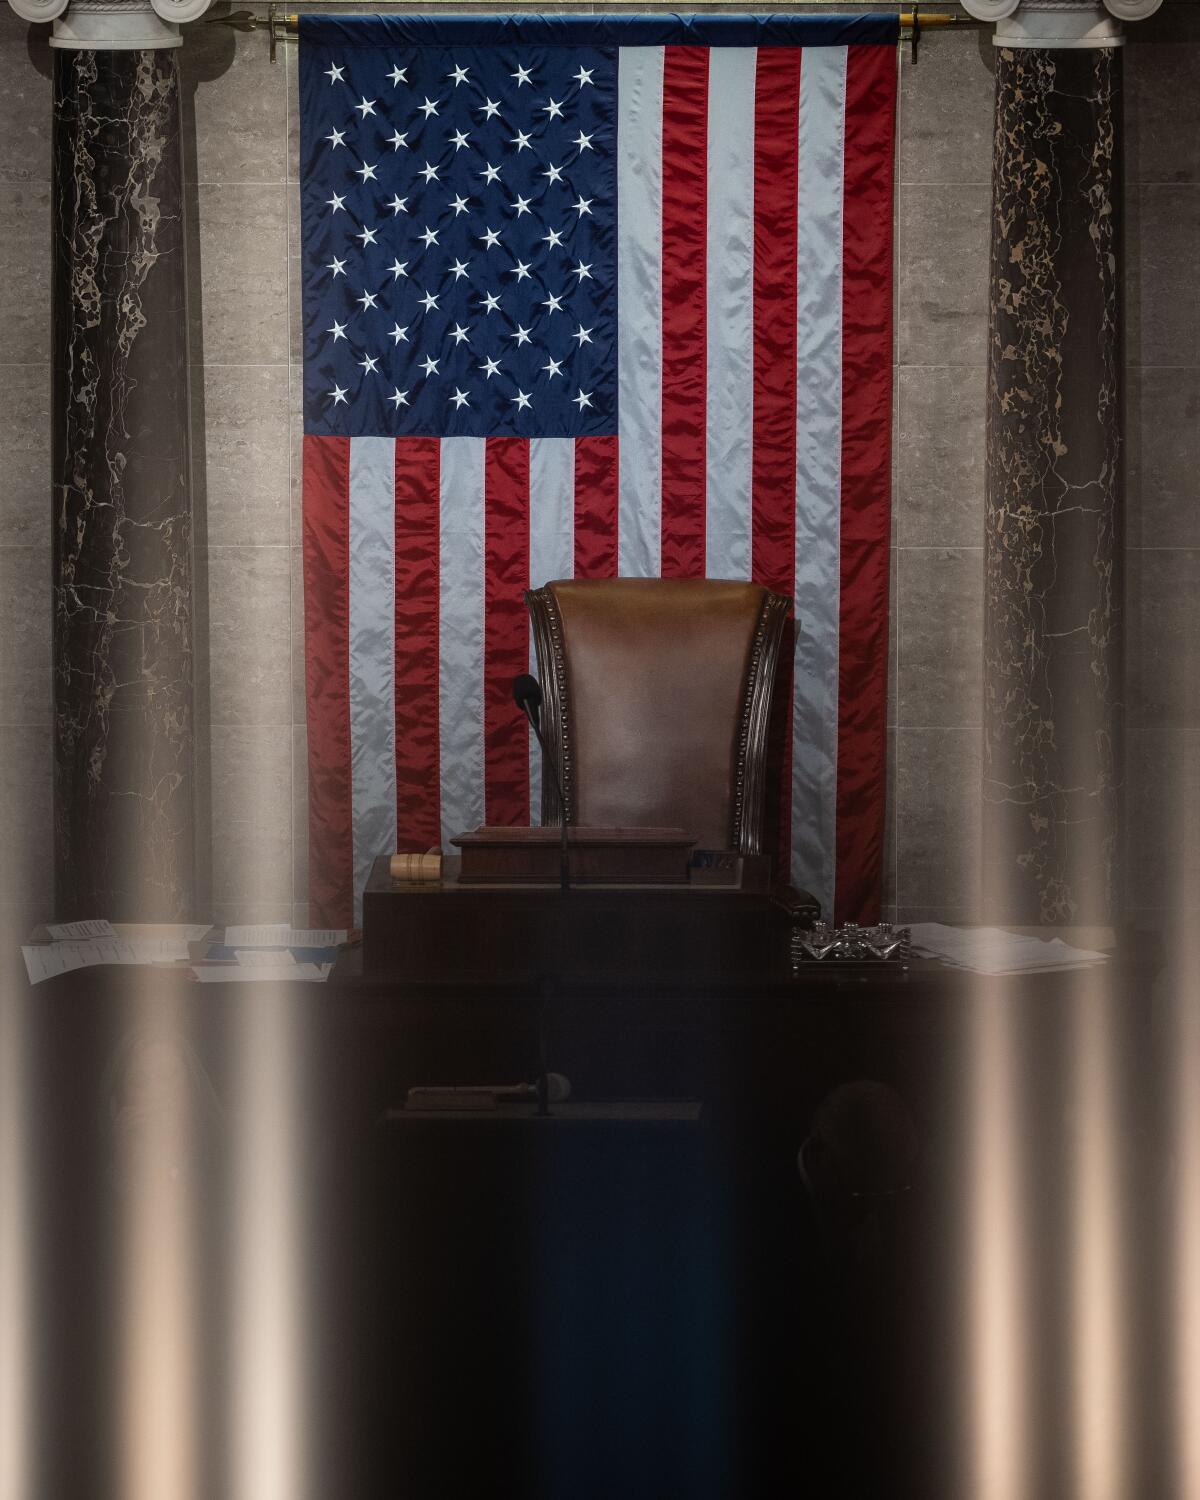 An empty chair sits in front of an American flag.